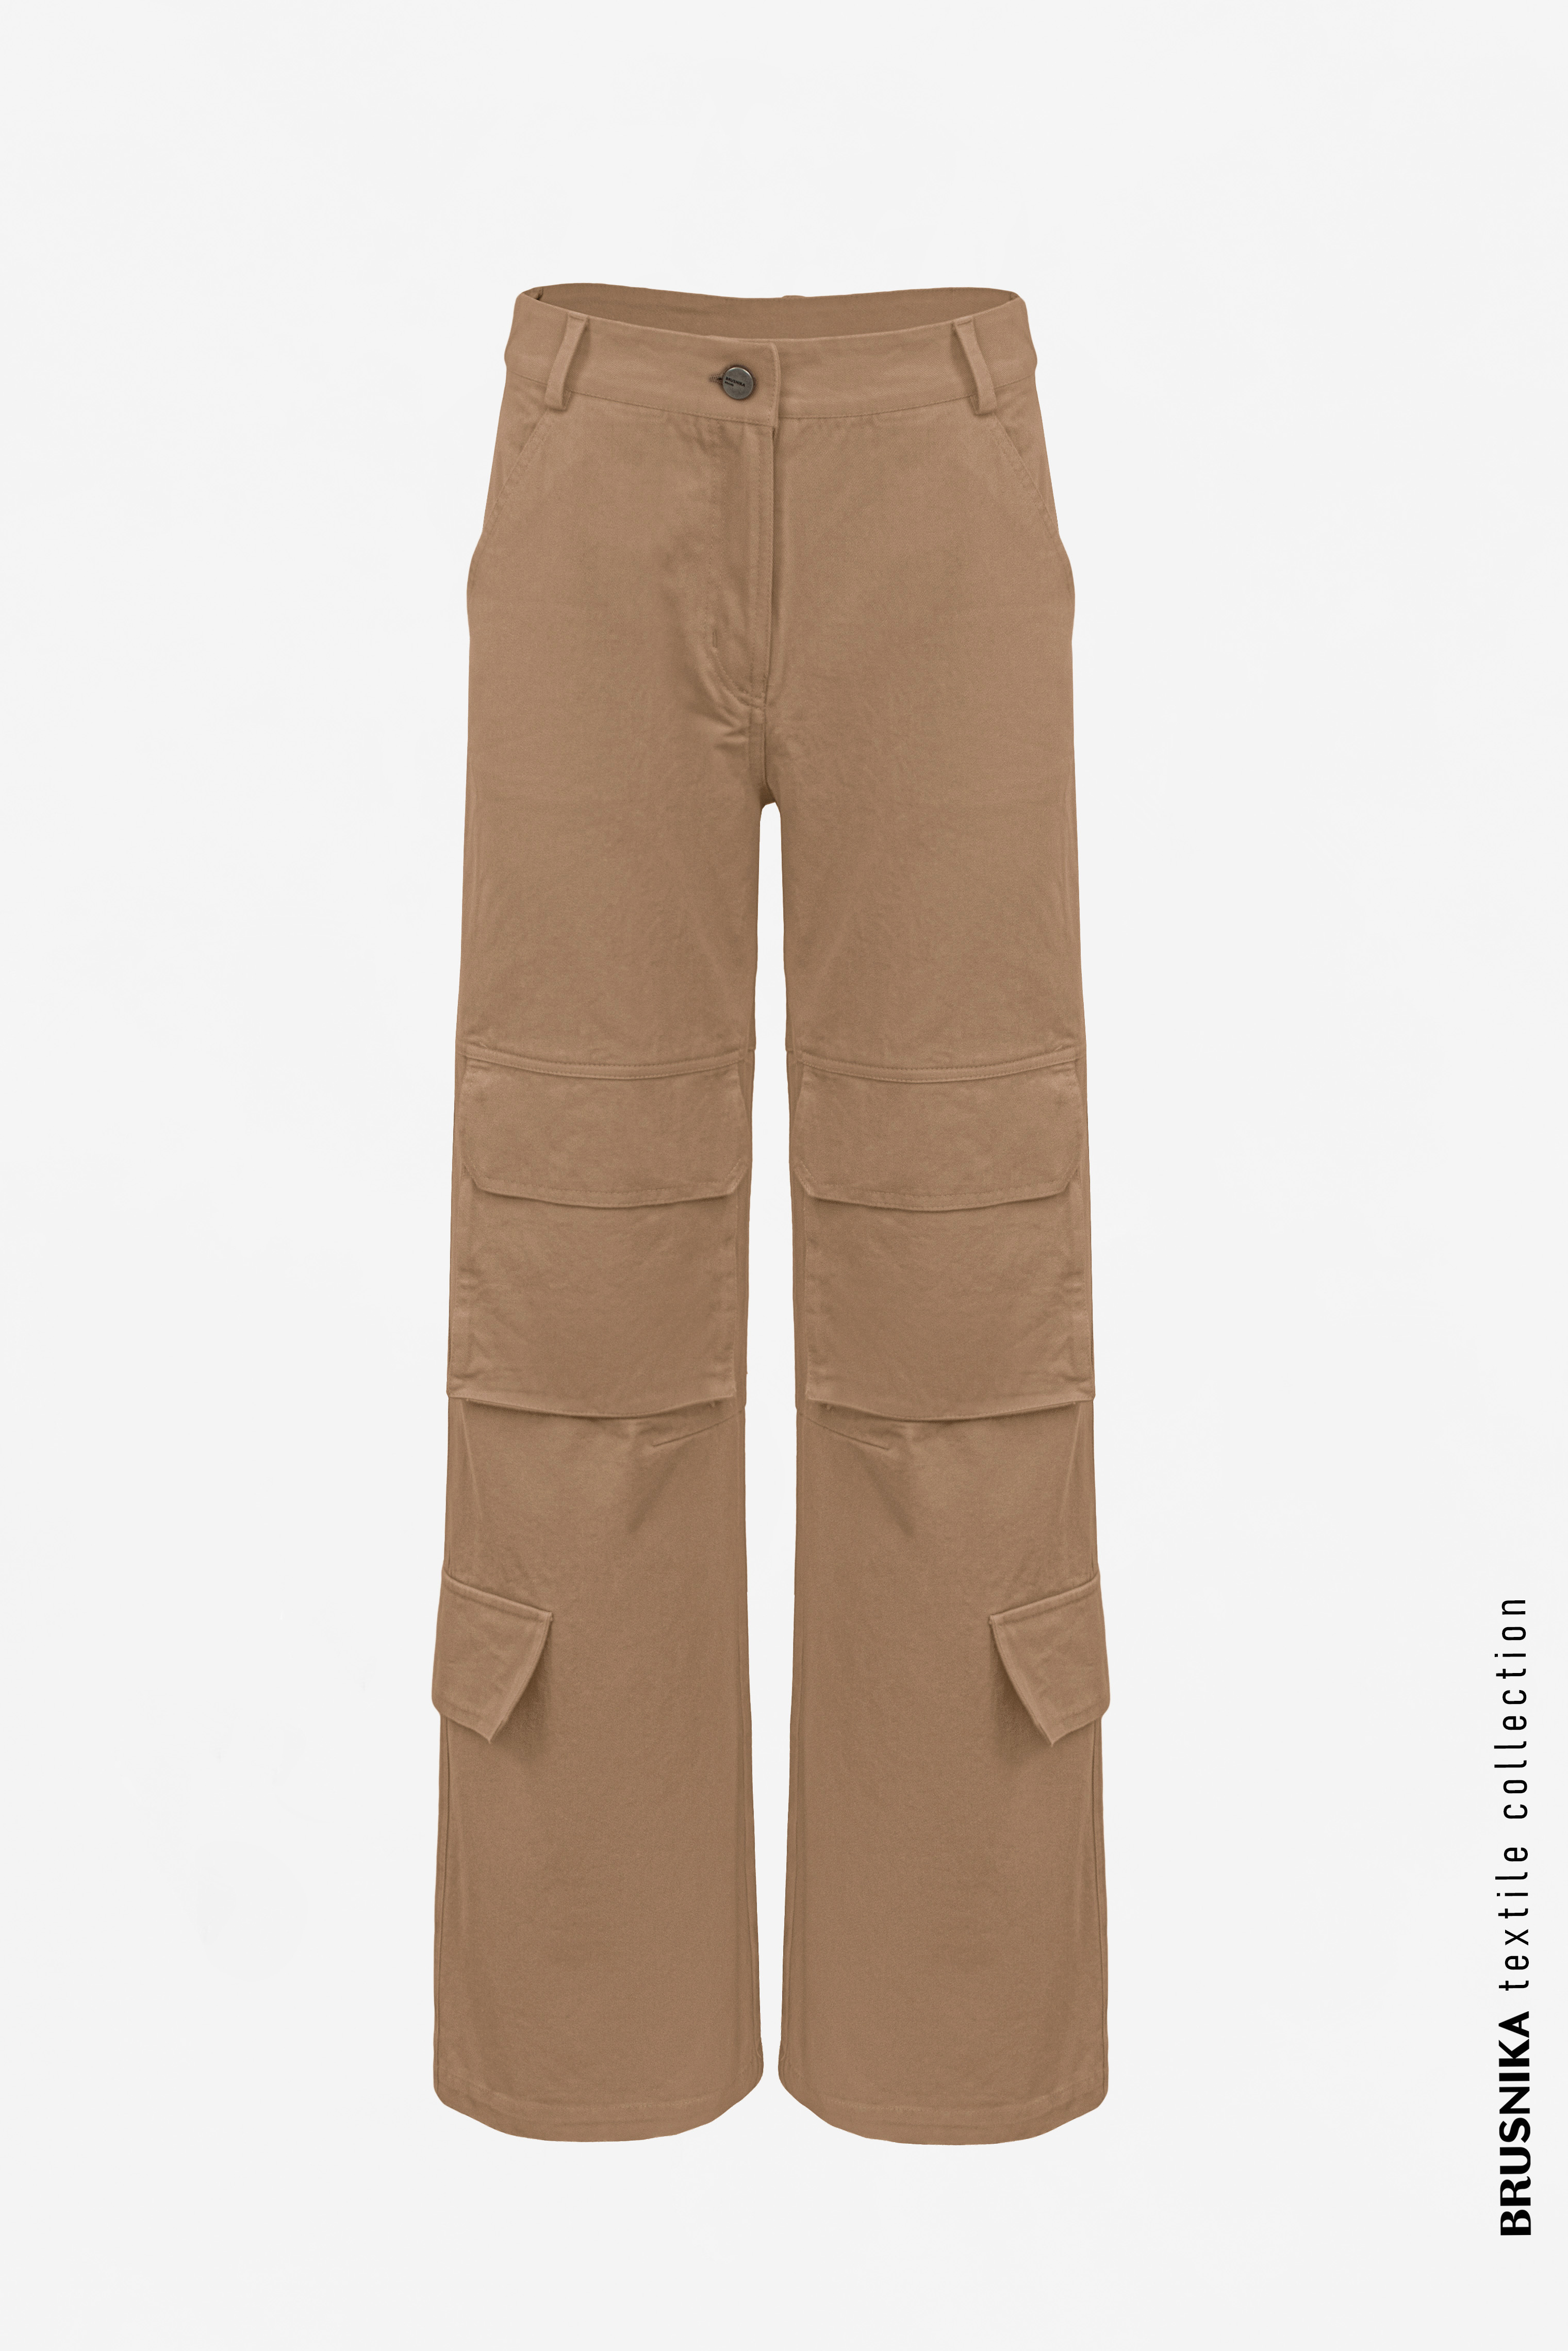 Trousers 3945-15.1 Light Brown . from BRUSNiKA